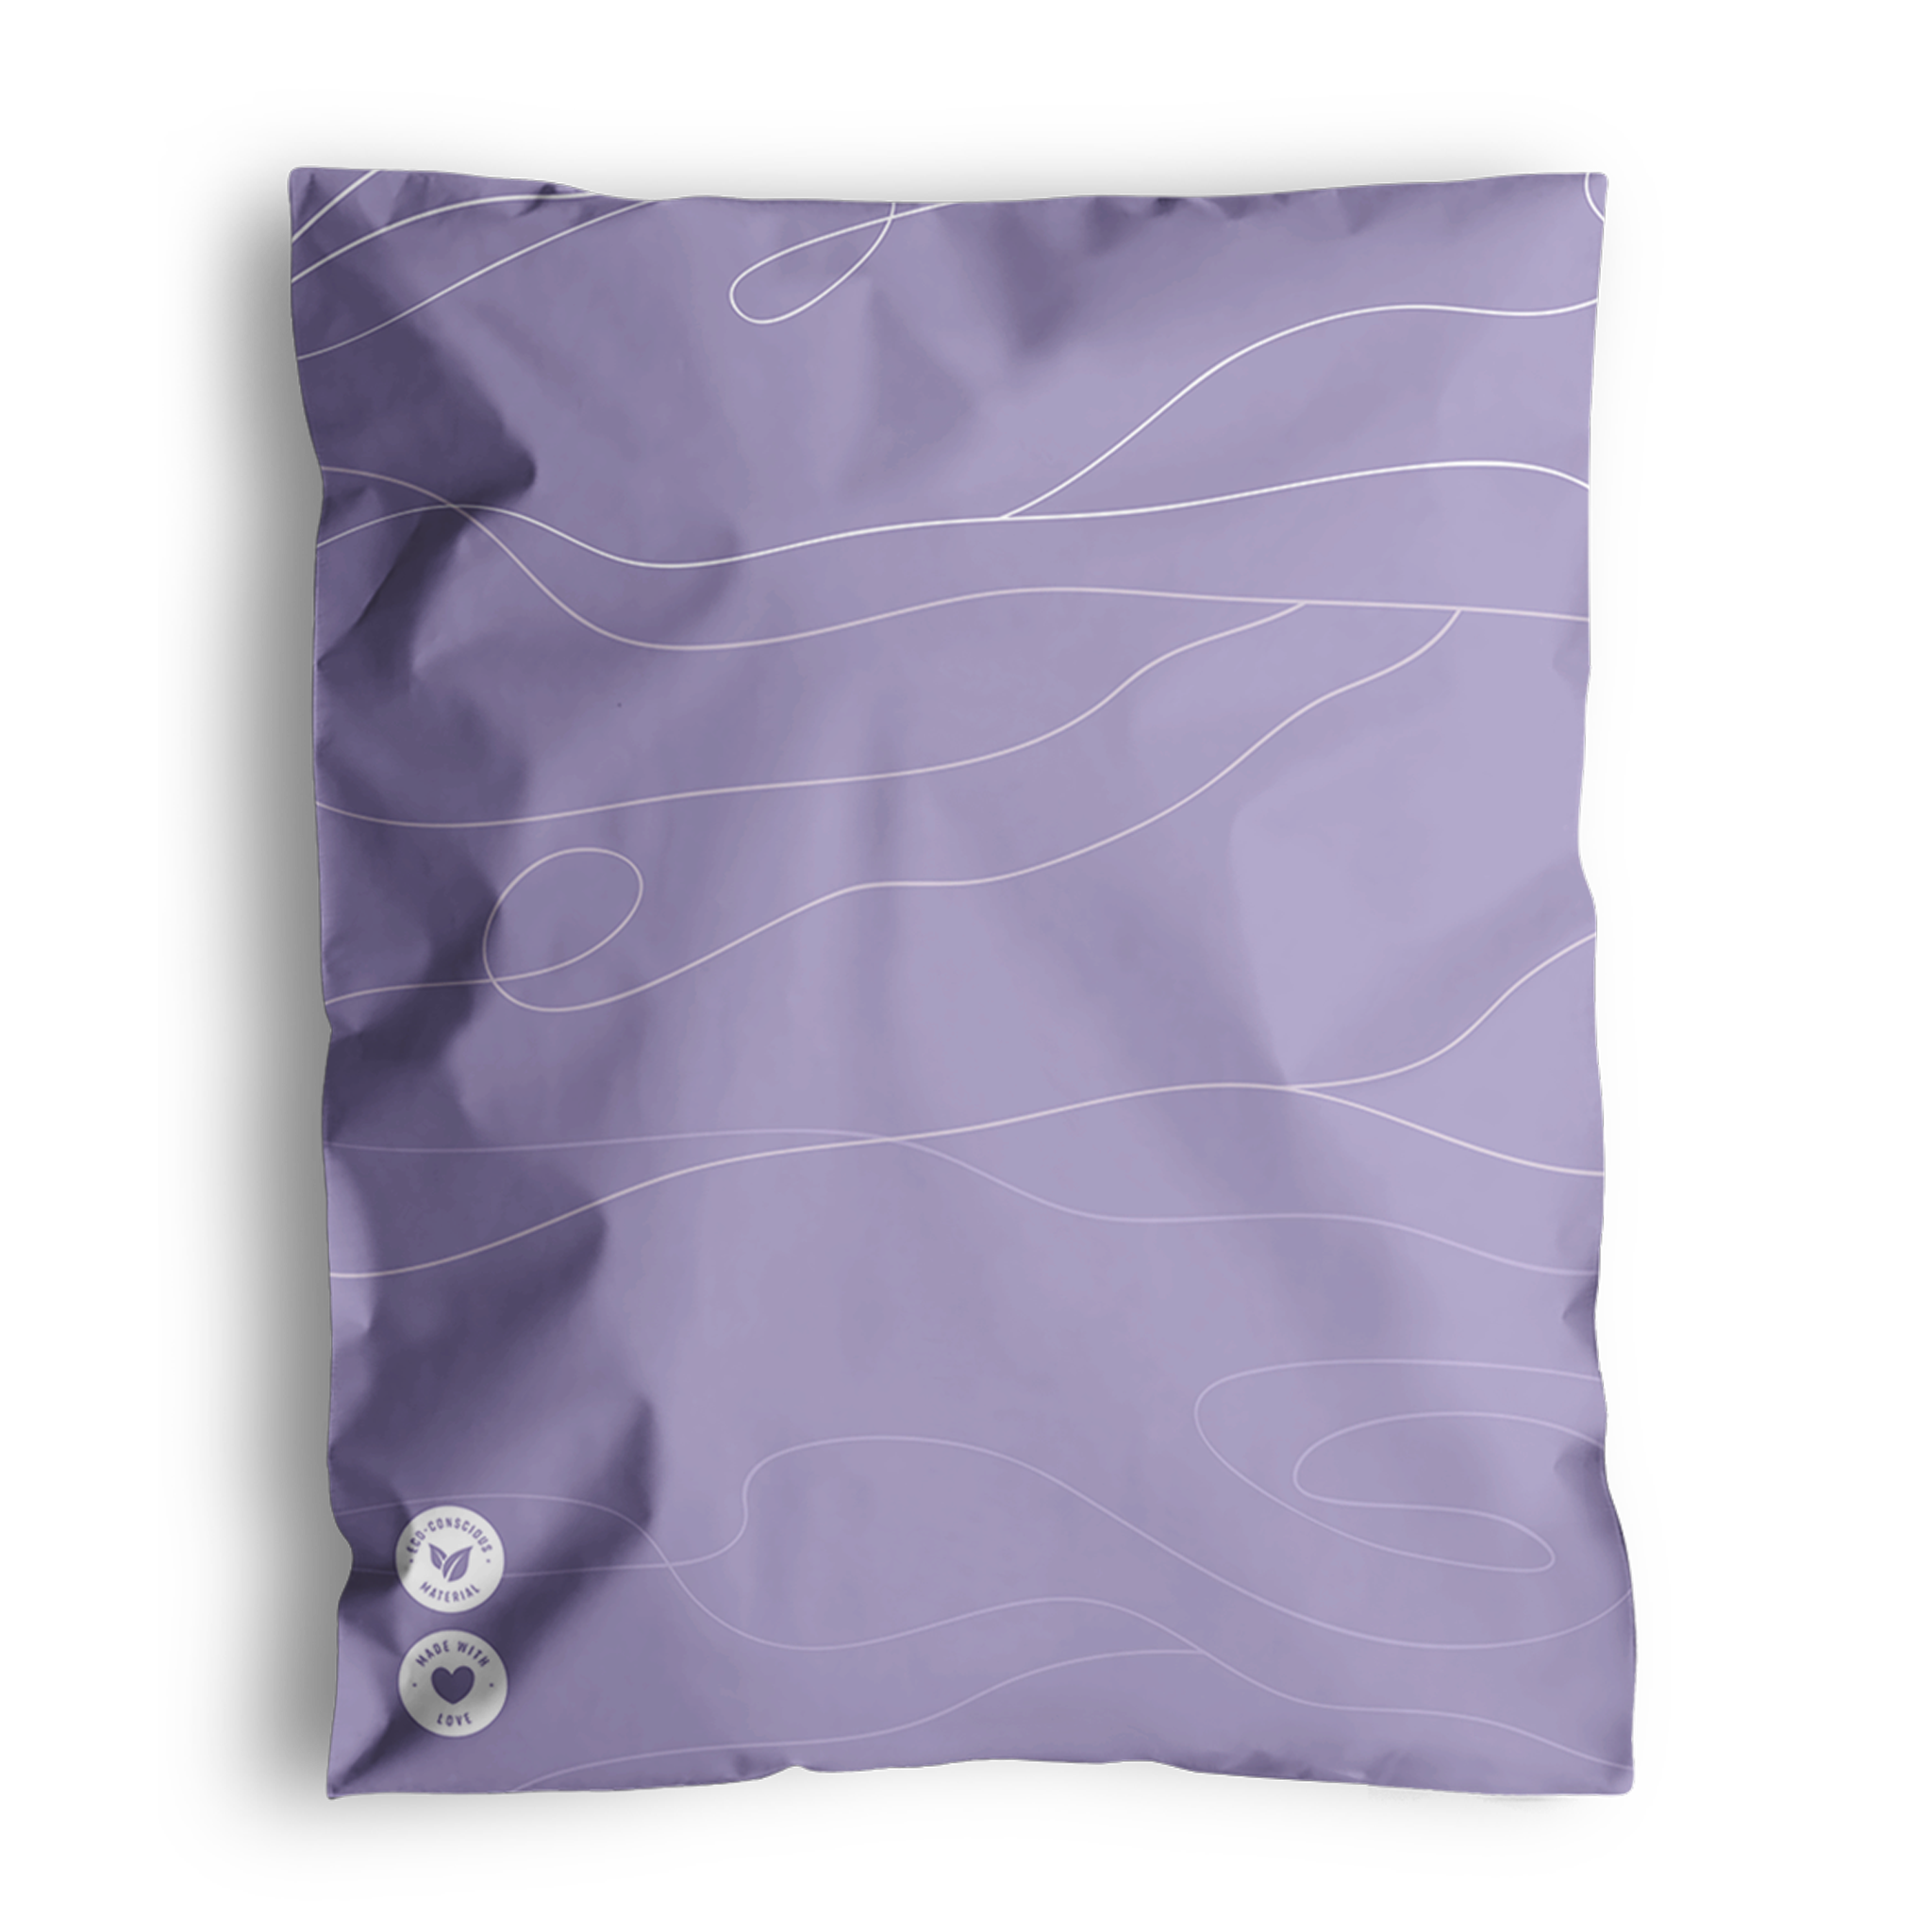 A crumpled lavender-colored resealable bag with white wavy lines and two white circular symbols near the bottom left corner provides a versatile packaging solution: the Tidal Lilac Mailers 10" x 13" by impack.co.